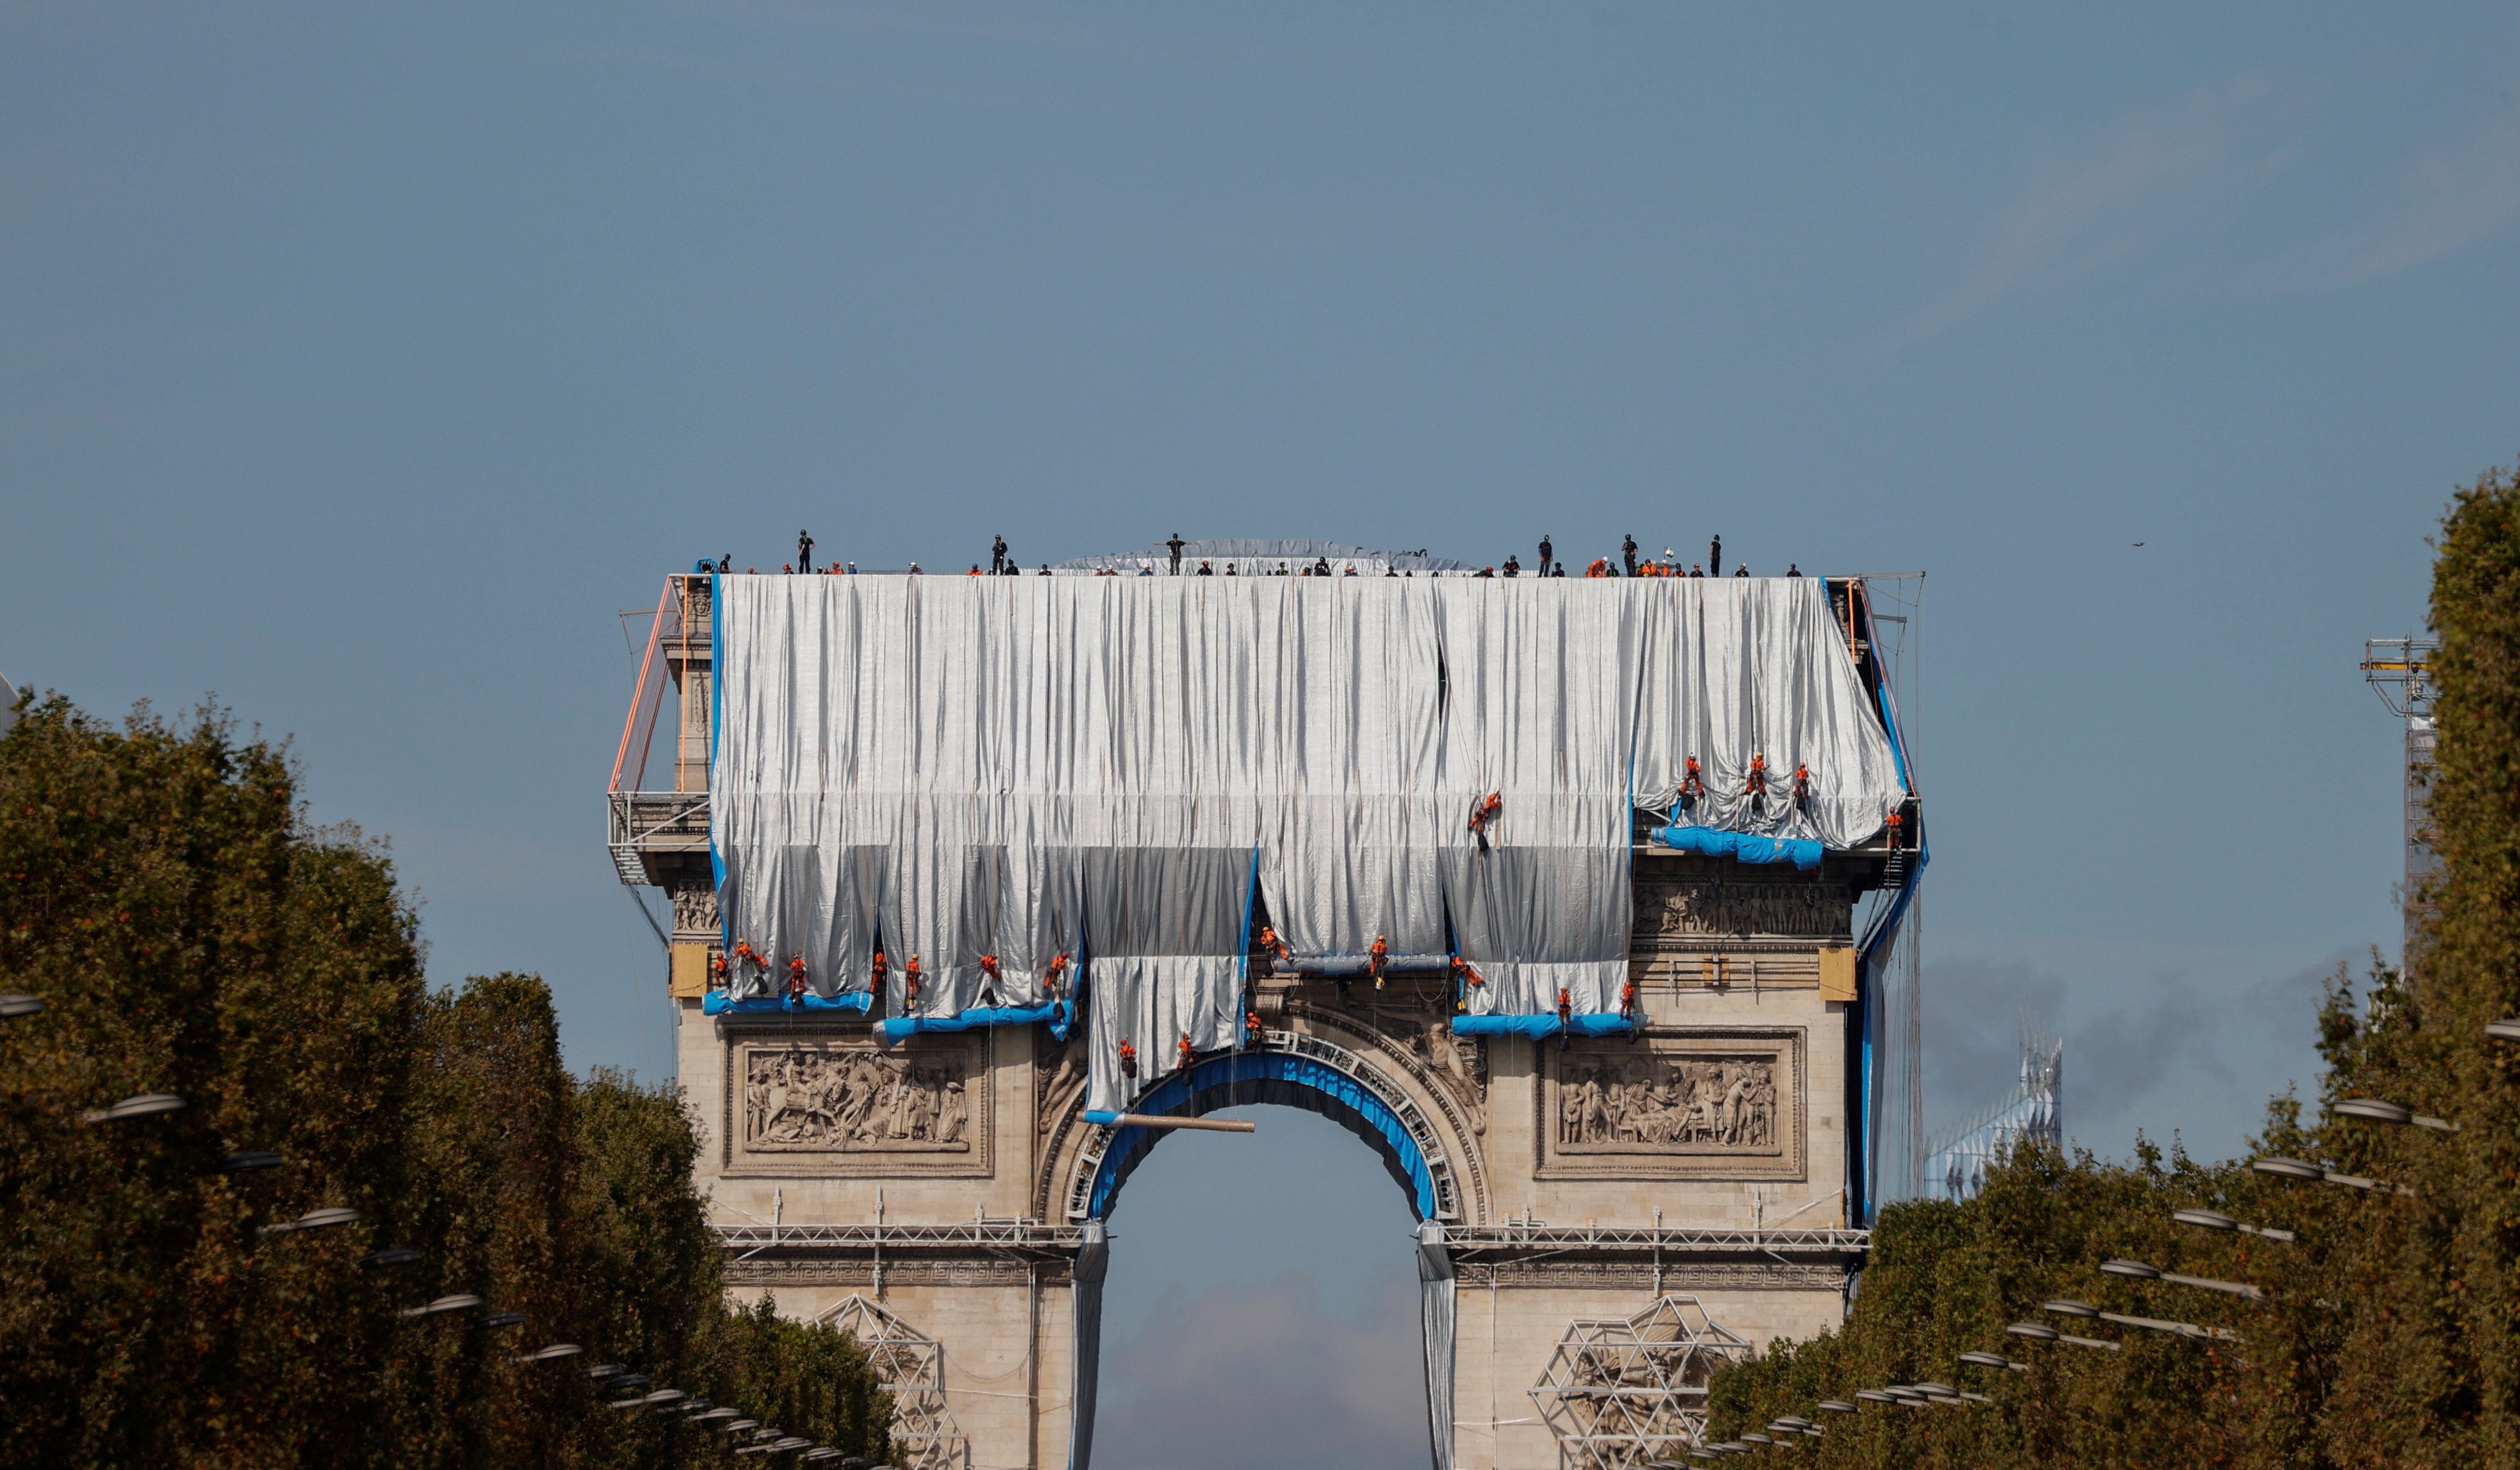 Arc de Triomphe enveloped by a shimmering wrapper in a posthumous installation by artist Christo